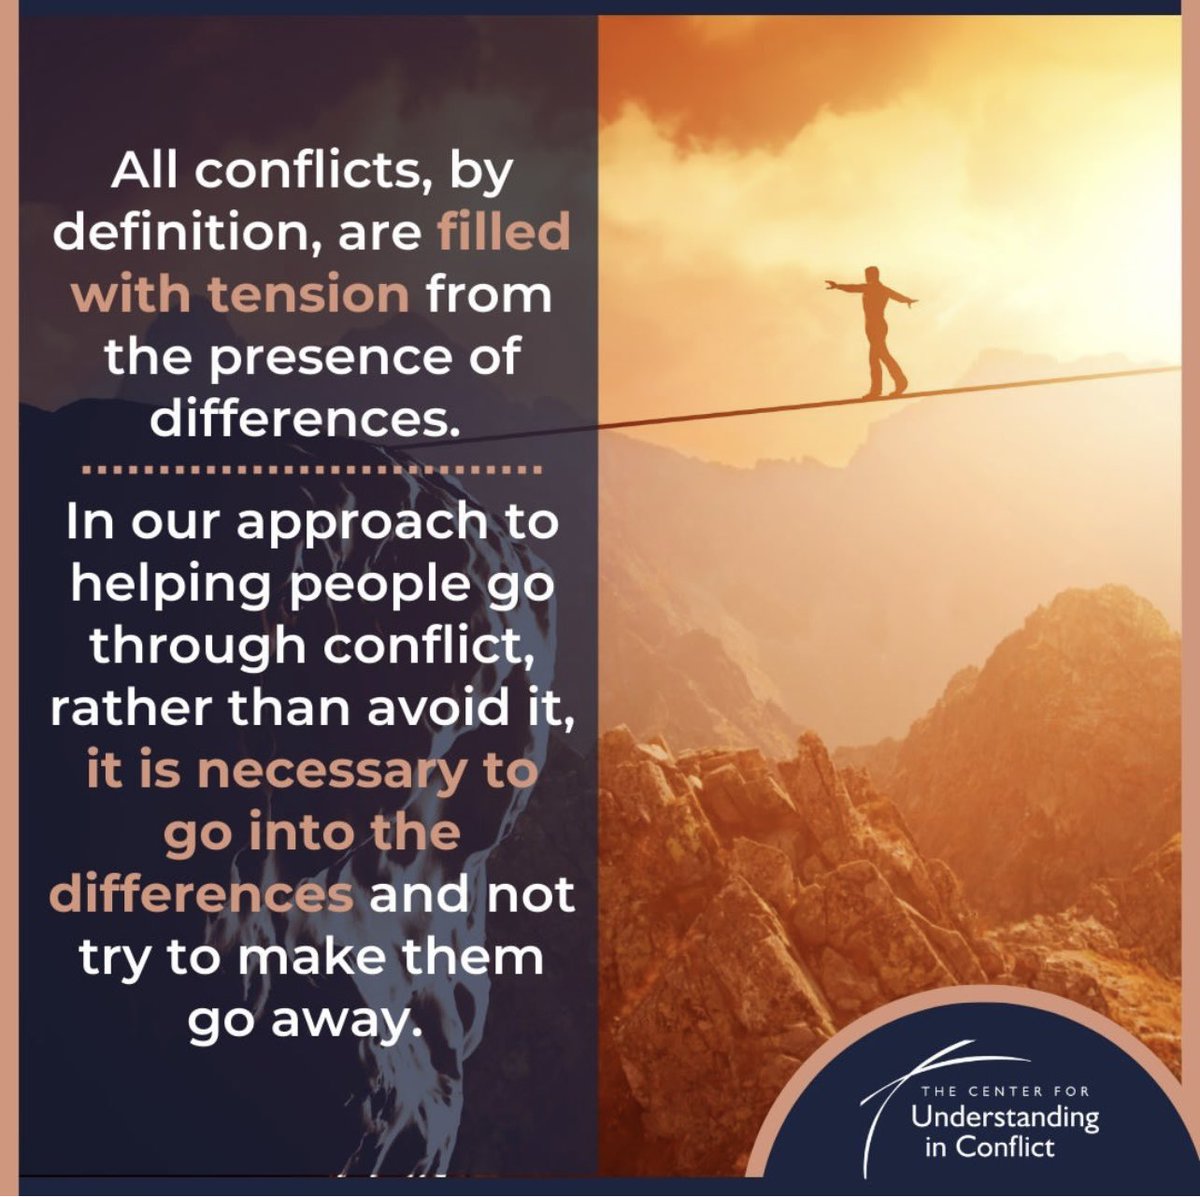 Thank you @inside_conflict for this one! It’s amazing how far a little #validation can take you 🙌🏼 #hr #hrstrategy #conflictresolution #differences #mediation #alternativedisputeresolution #understandingconflict